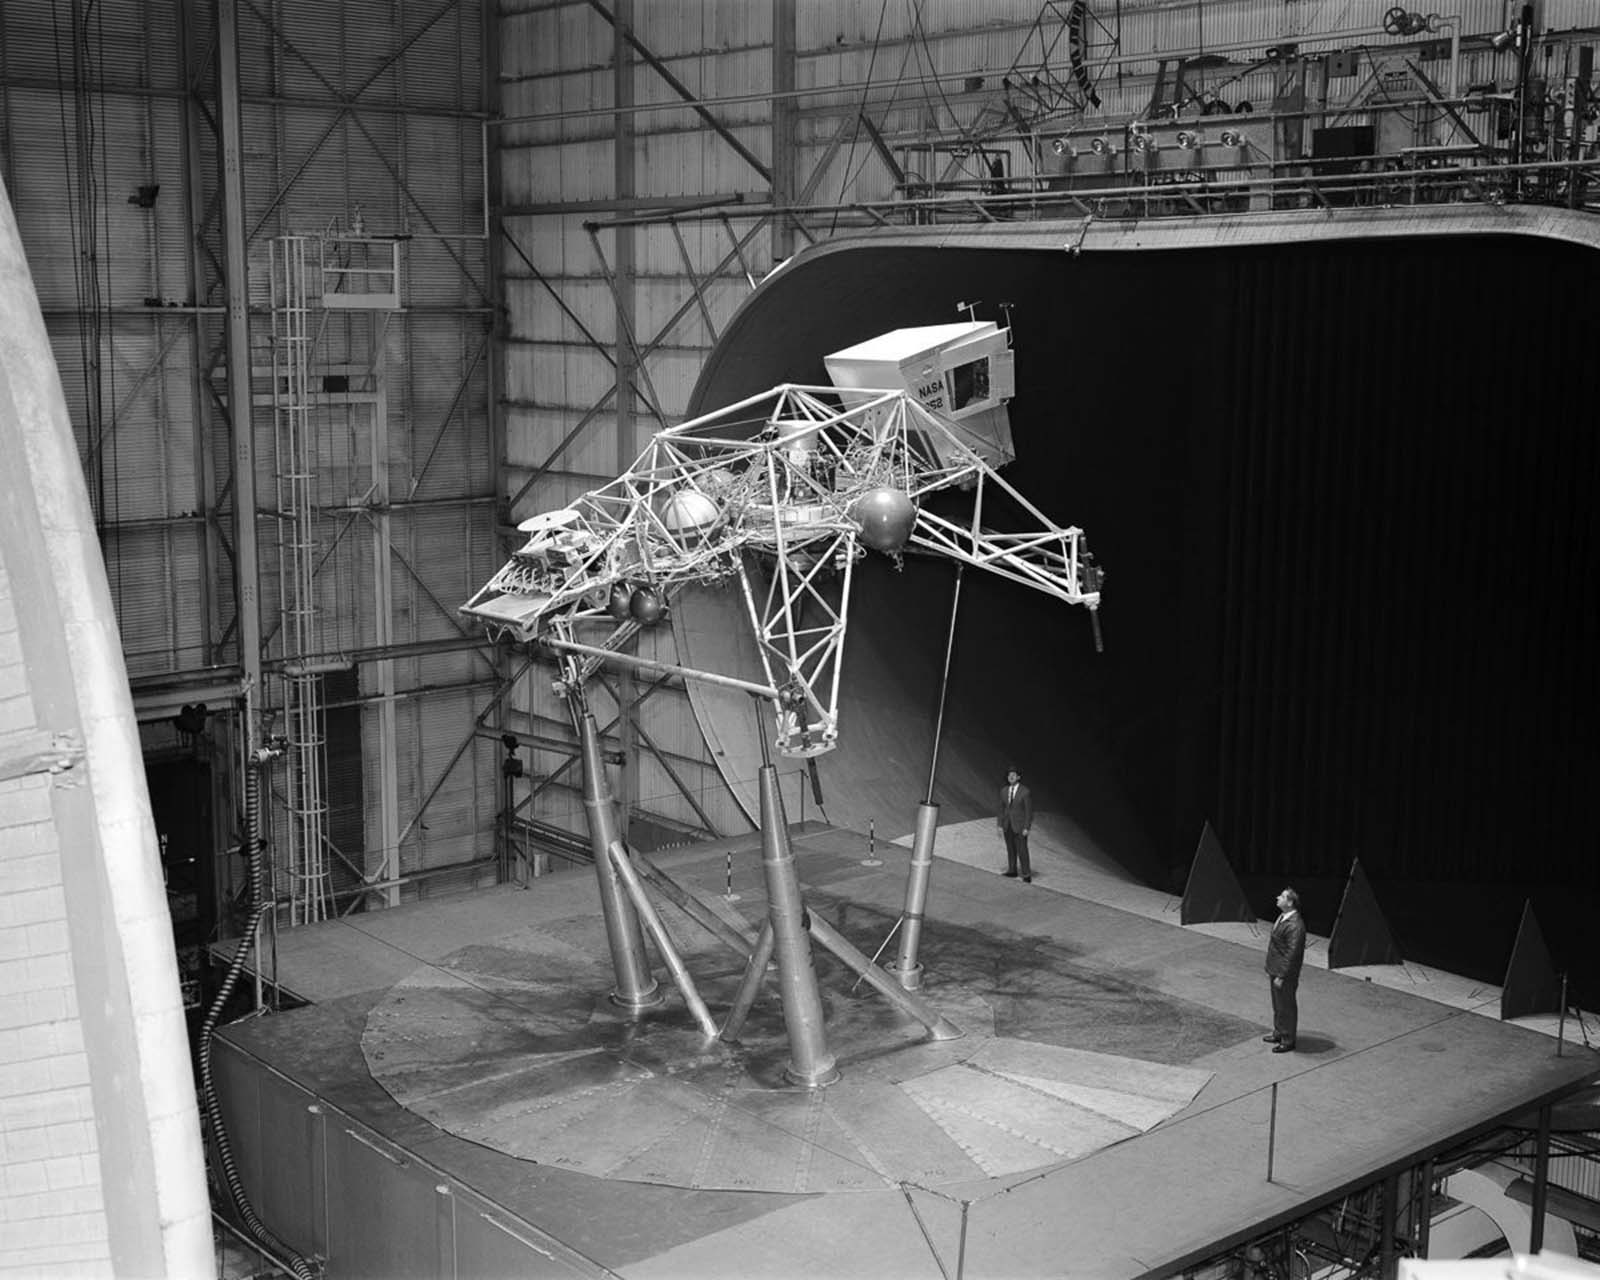 The Bell Lunar Landing Training Vehicle in the 30 x 60 Full Scale Tunnel.